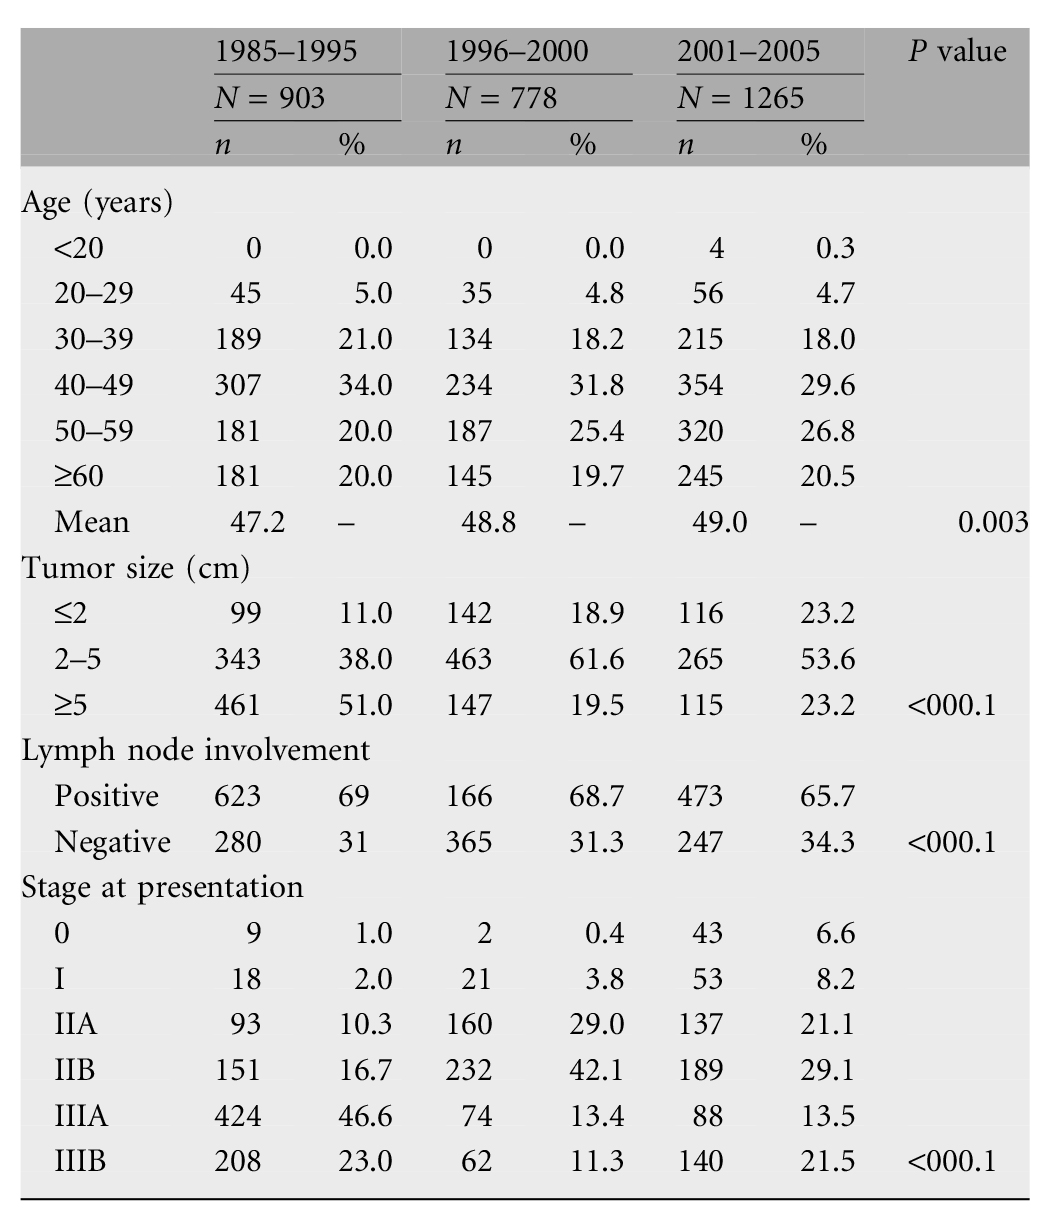 Characteristics of women with breast cancer in a multicenter study in Tehran, Iran 